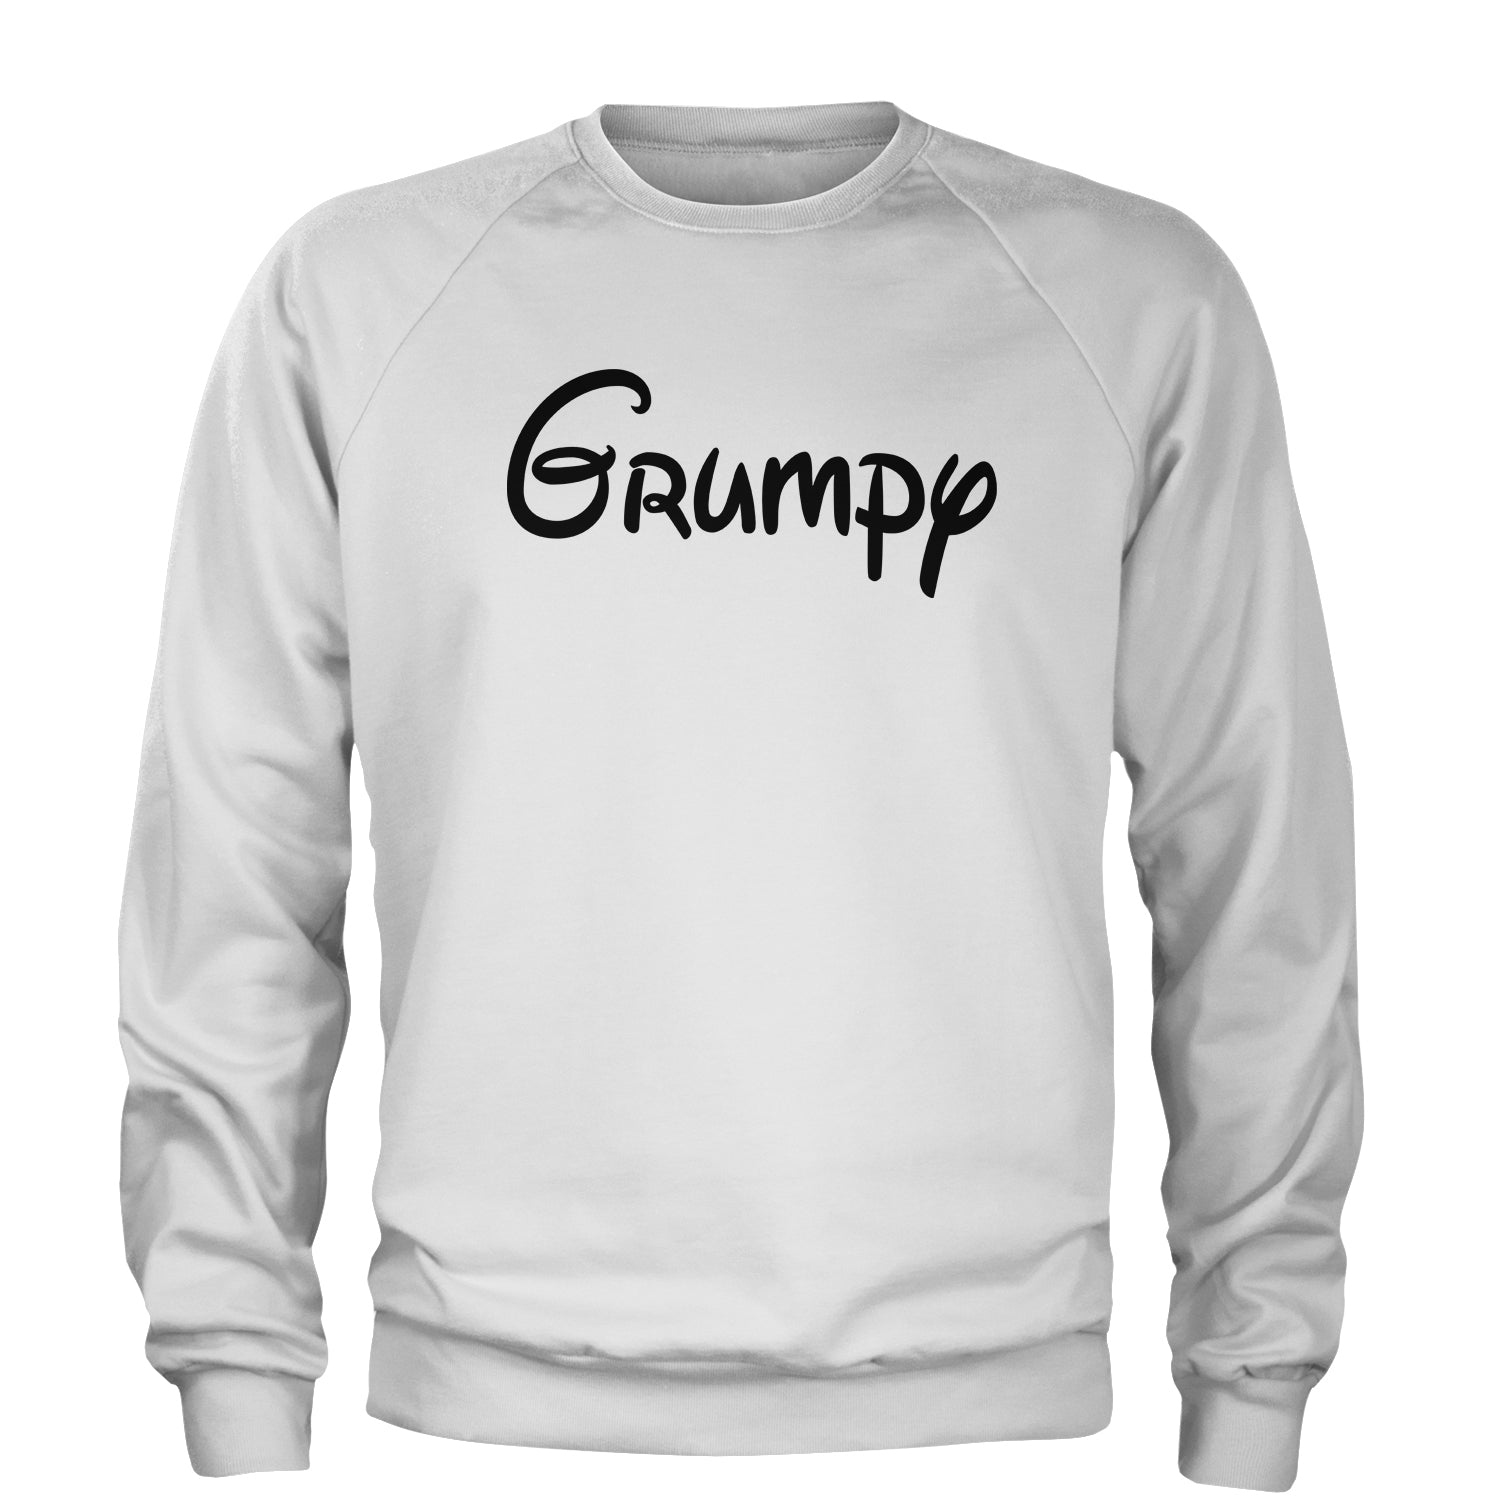 Grumpy - 7 Dwarfs Costume Adult Crewneck Sweatshirt and, costume, dwarfs, group, halloween, matching, seven, snow, the, white by Expression Tees